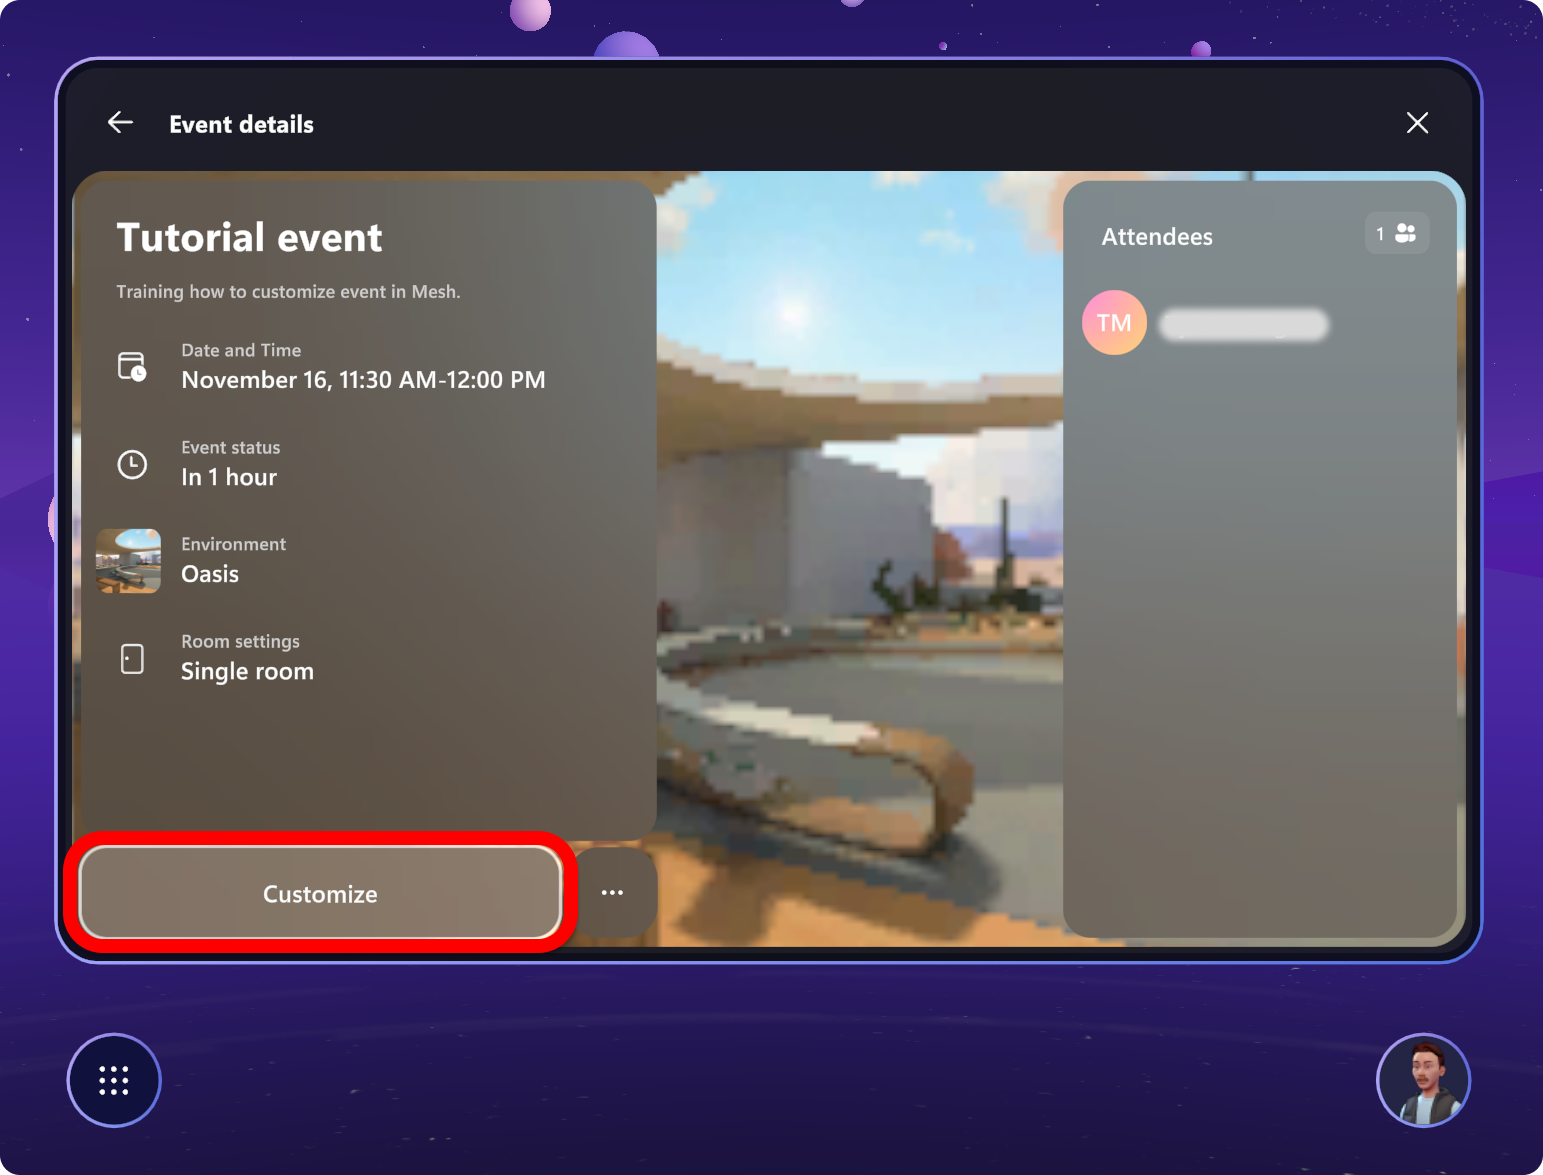 Screenshot of Mesh app showing Customize button for an event highlighted.